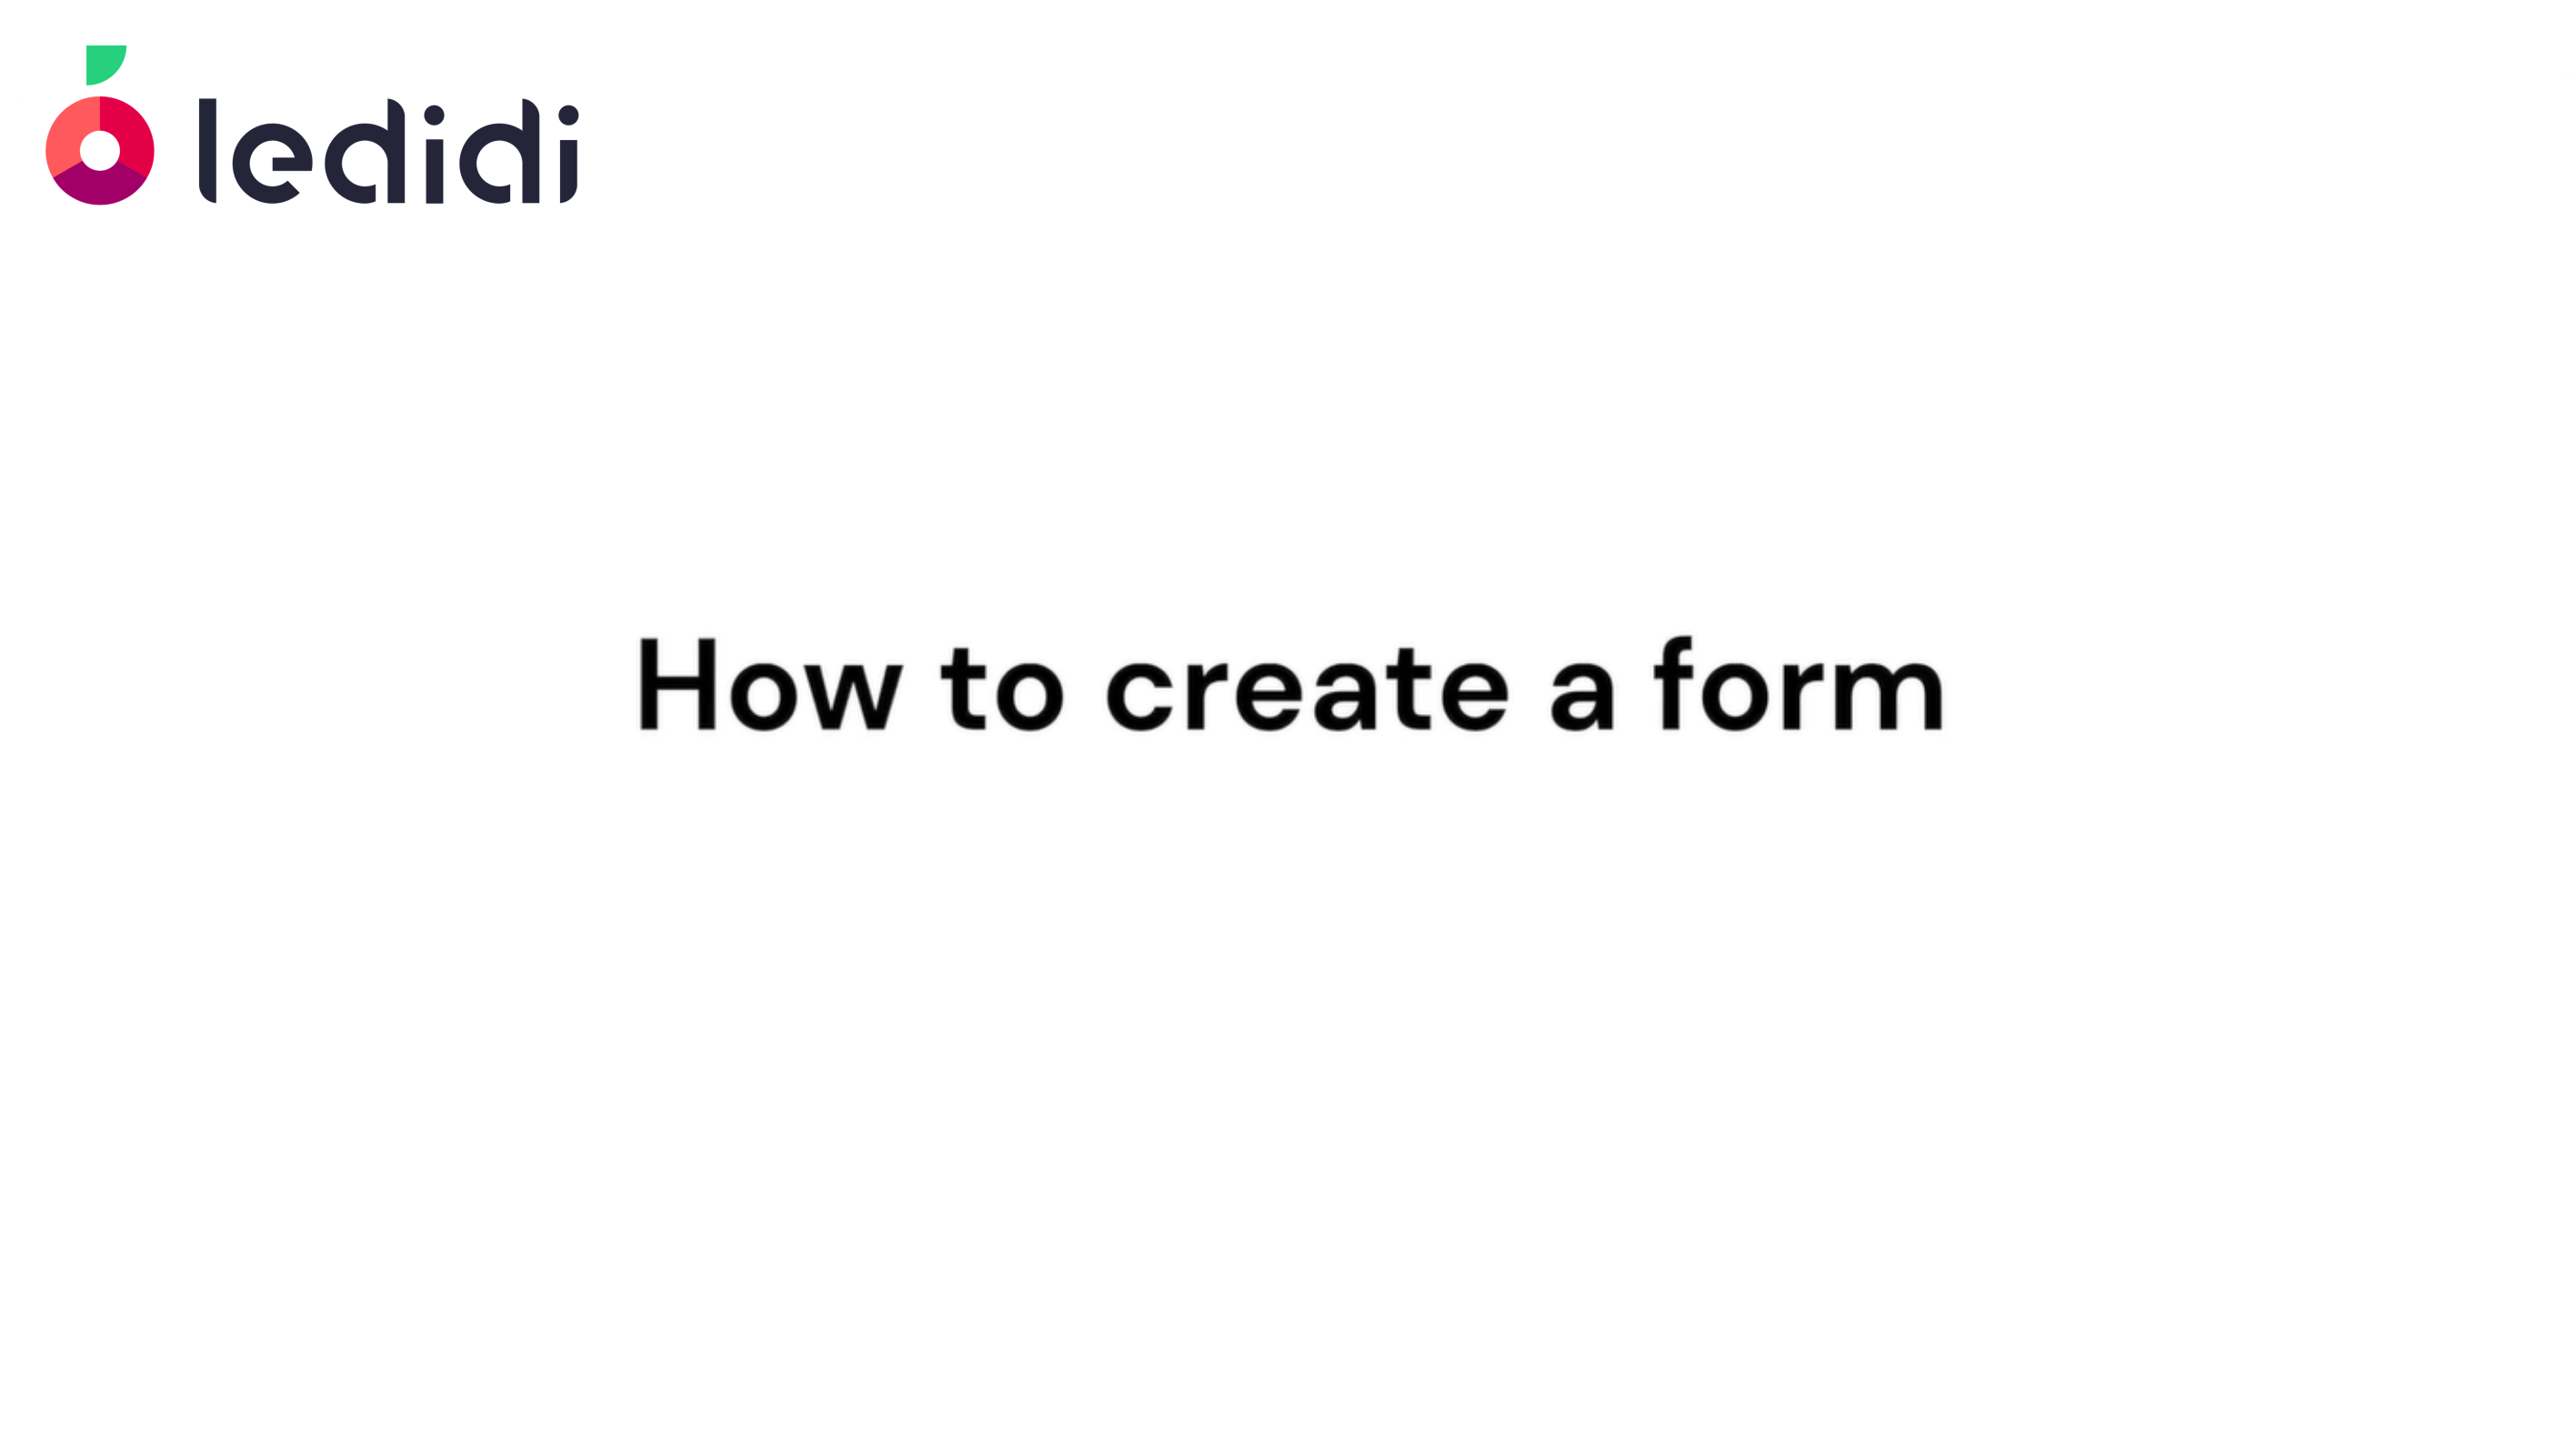 How to create a form